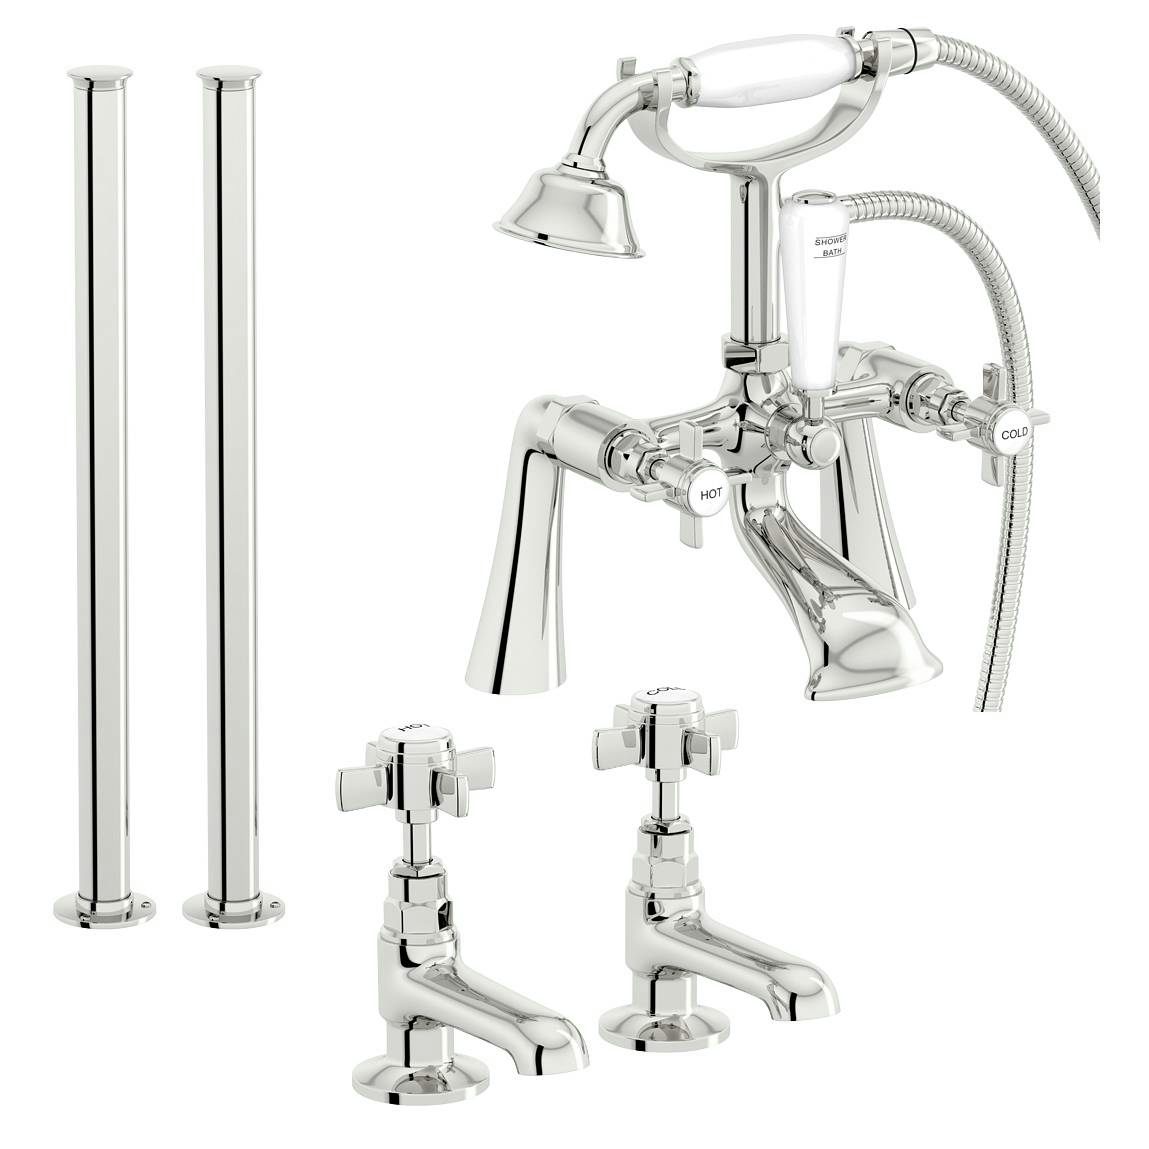 Orchard Dulwich basin tap and bath shower mixer adjustable standpipe tap pack